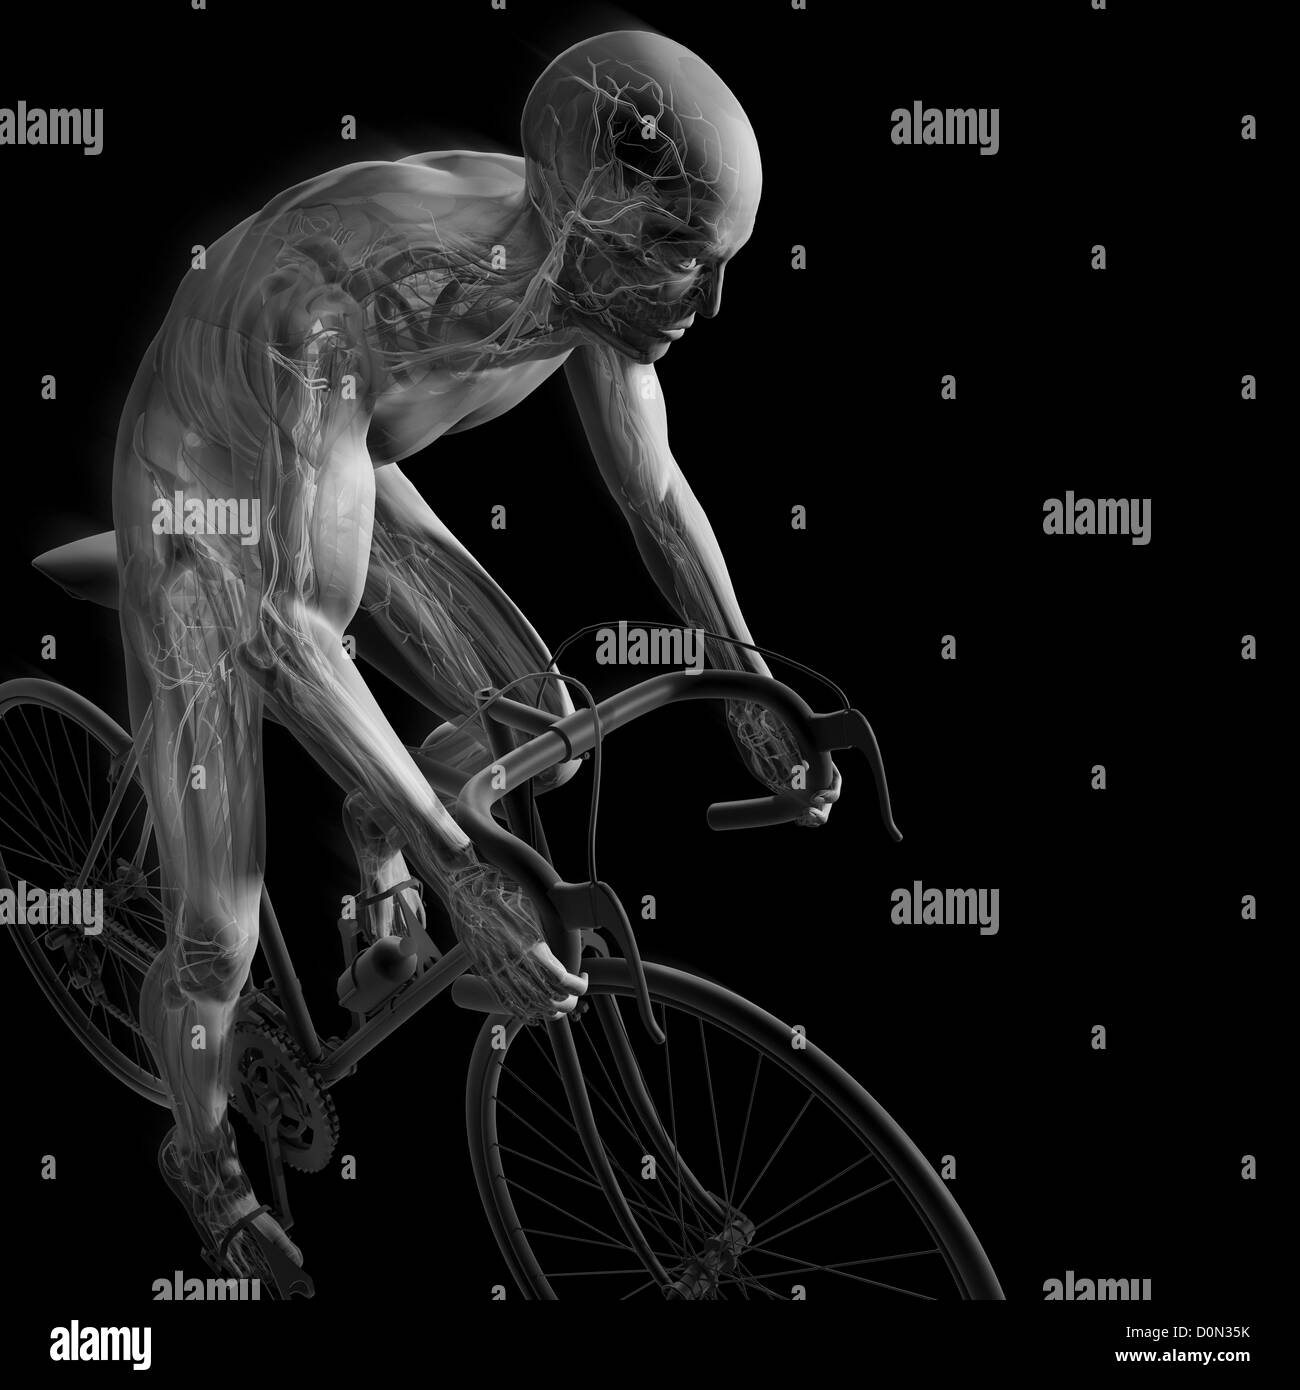 Male figure cycling a bicycle. The internal anatomy is visible within the body. Stock Photo